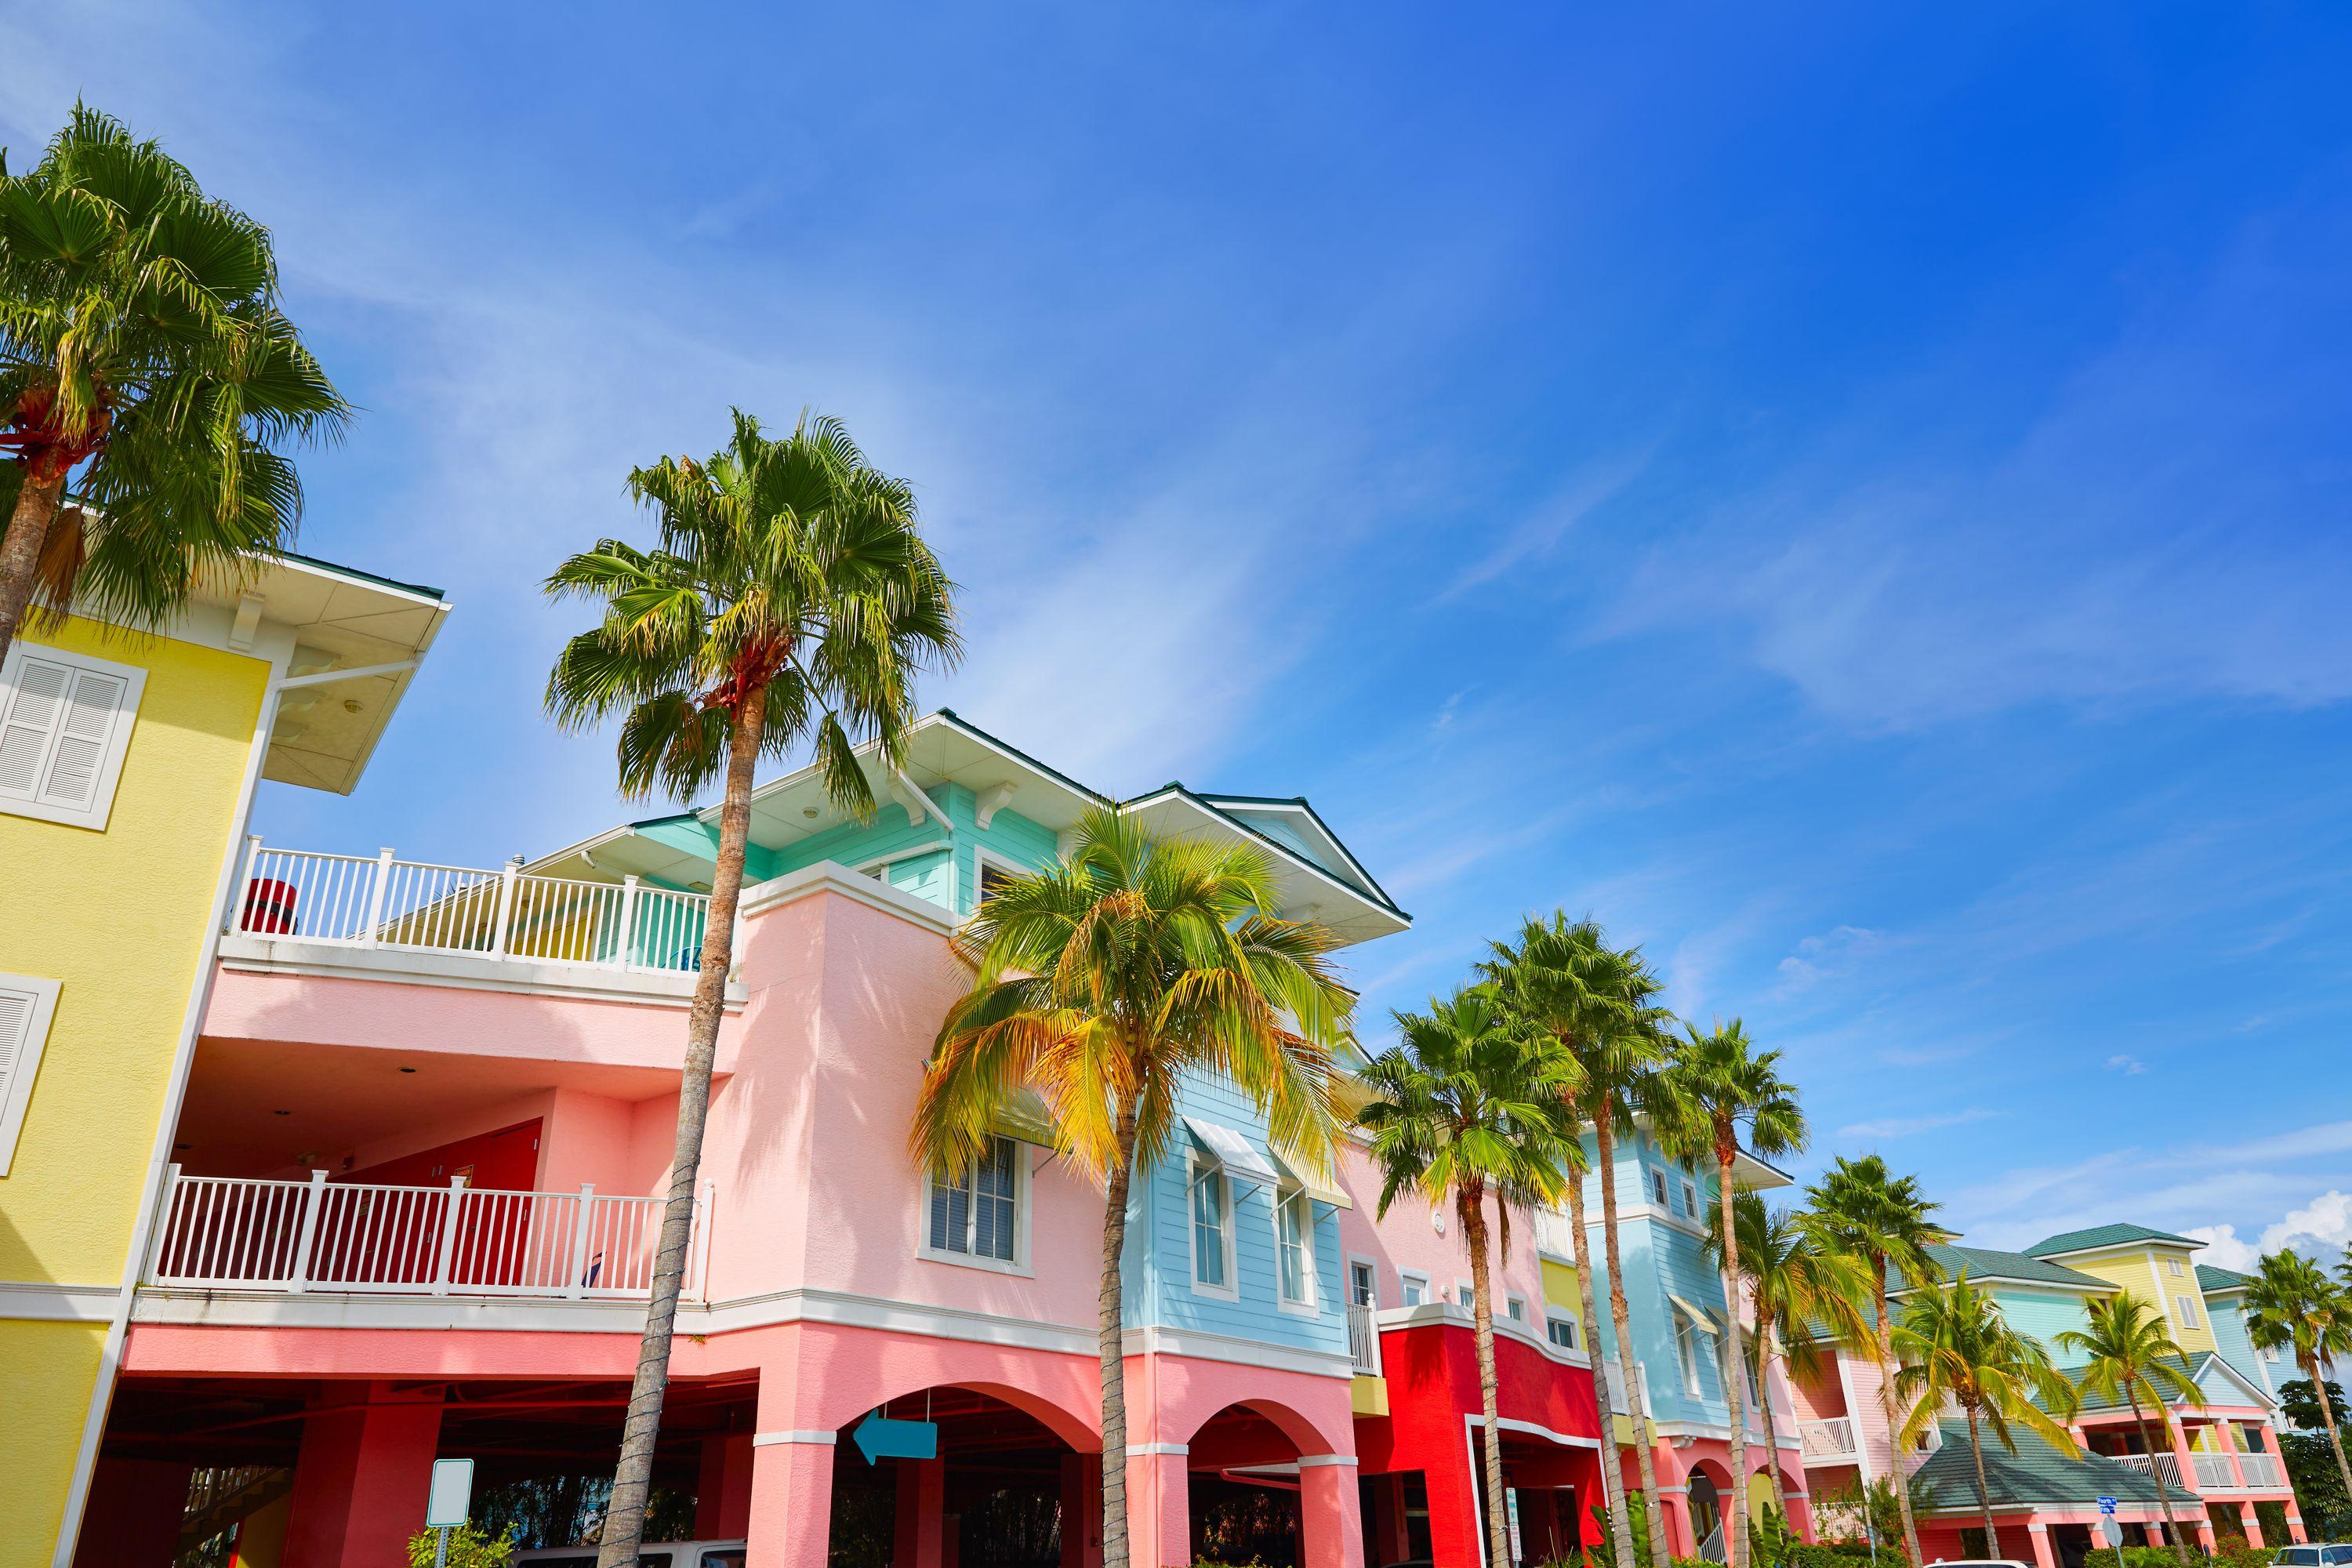 cheap flights from new jersey to florida